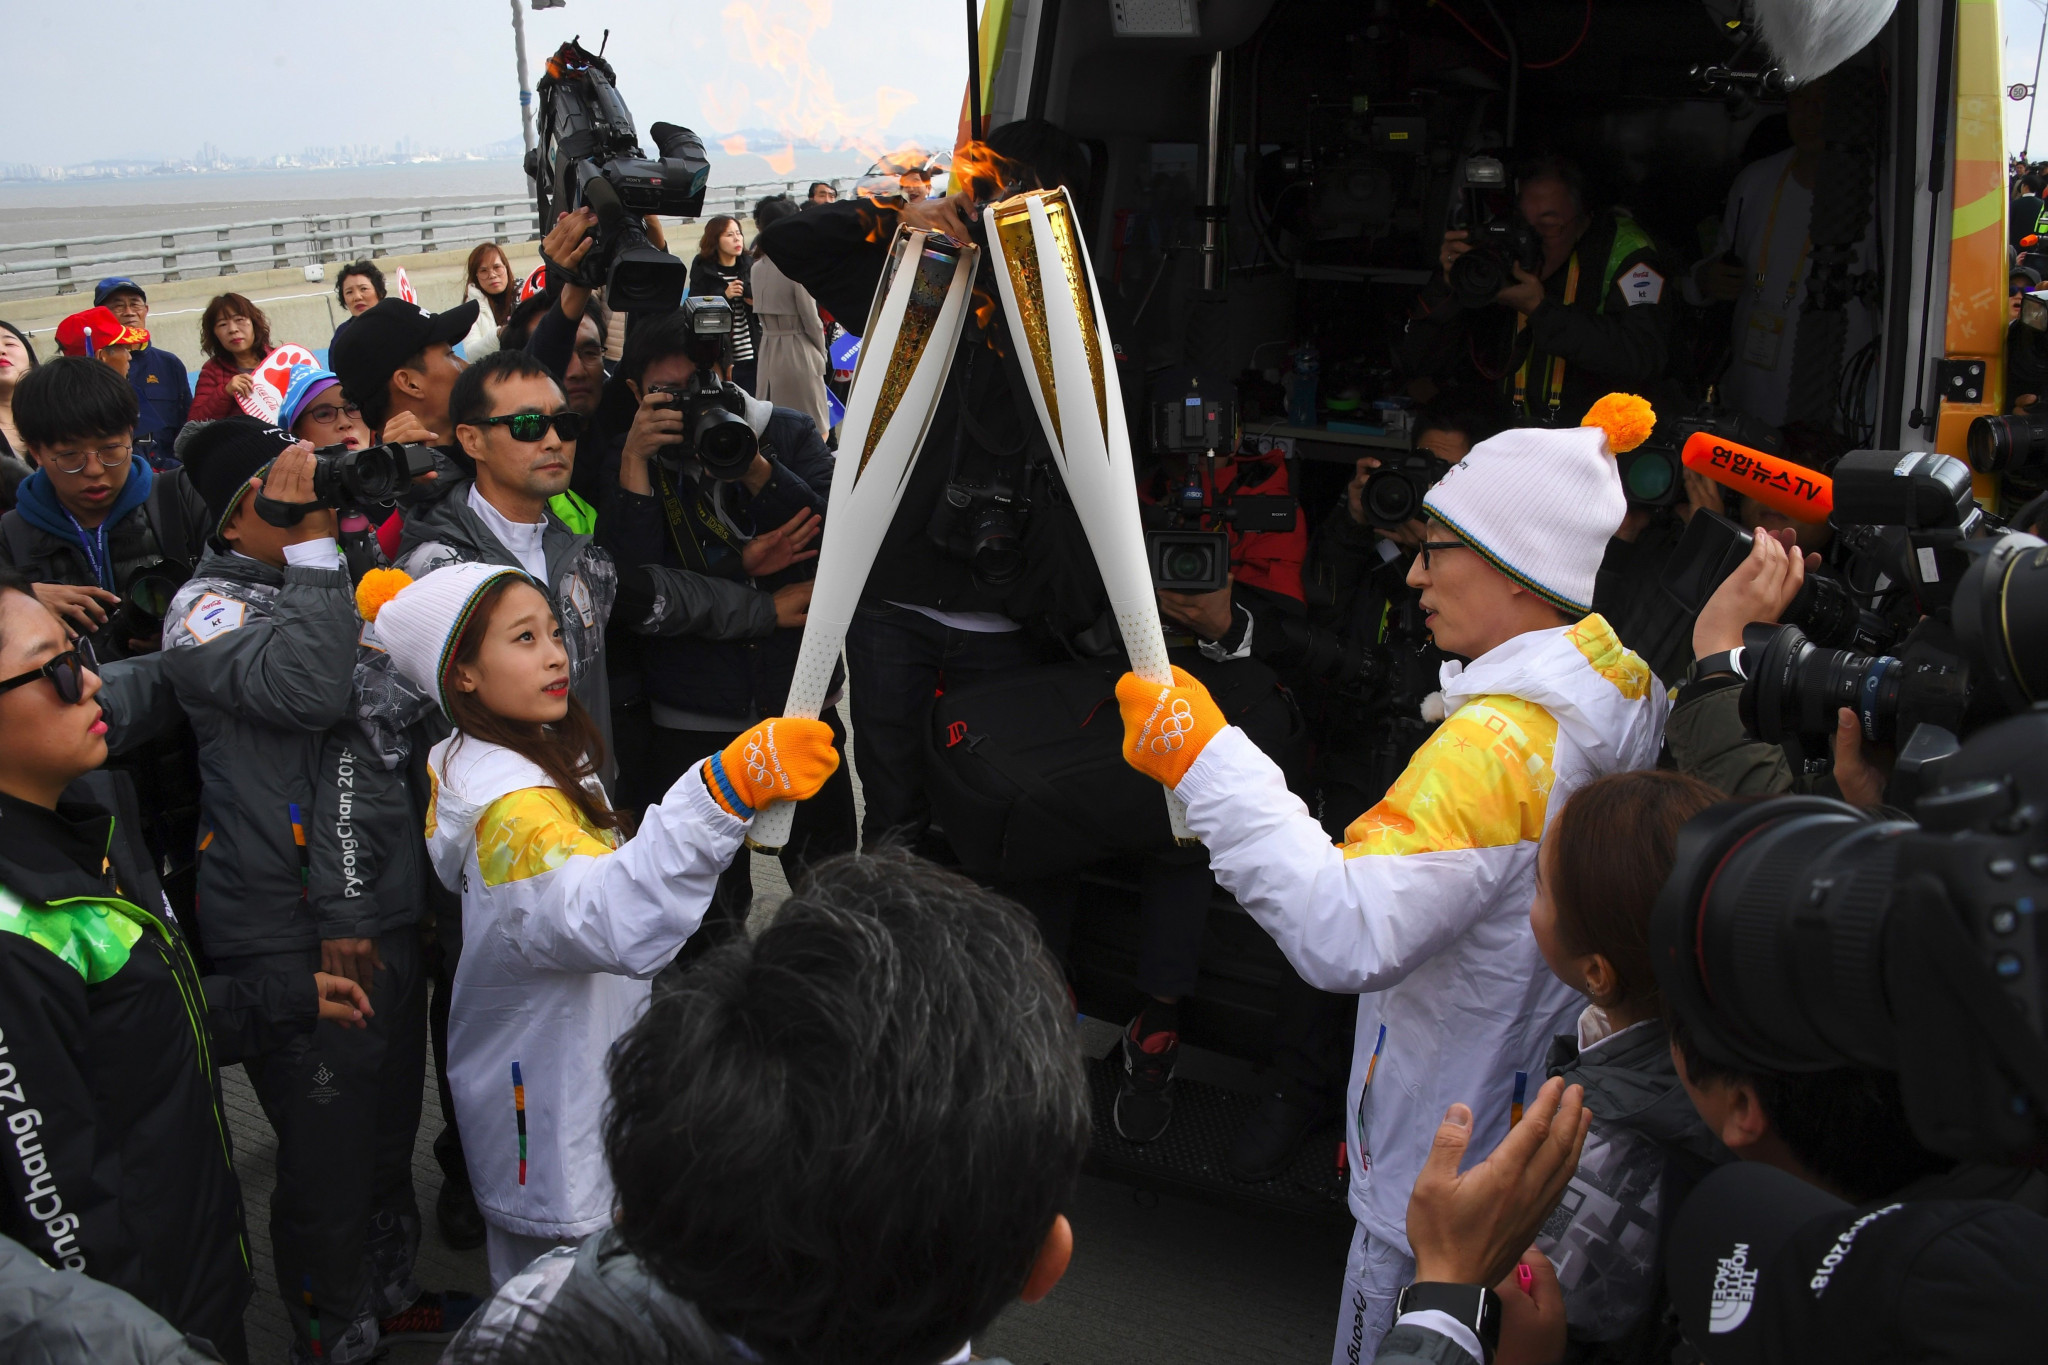 Television star and comedian Yoo Jae-suk then continued the Relay after receiving the torch from You ©Getty Images